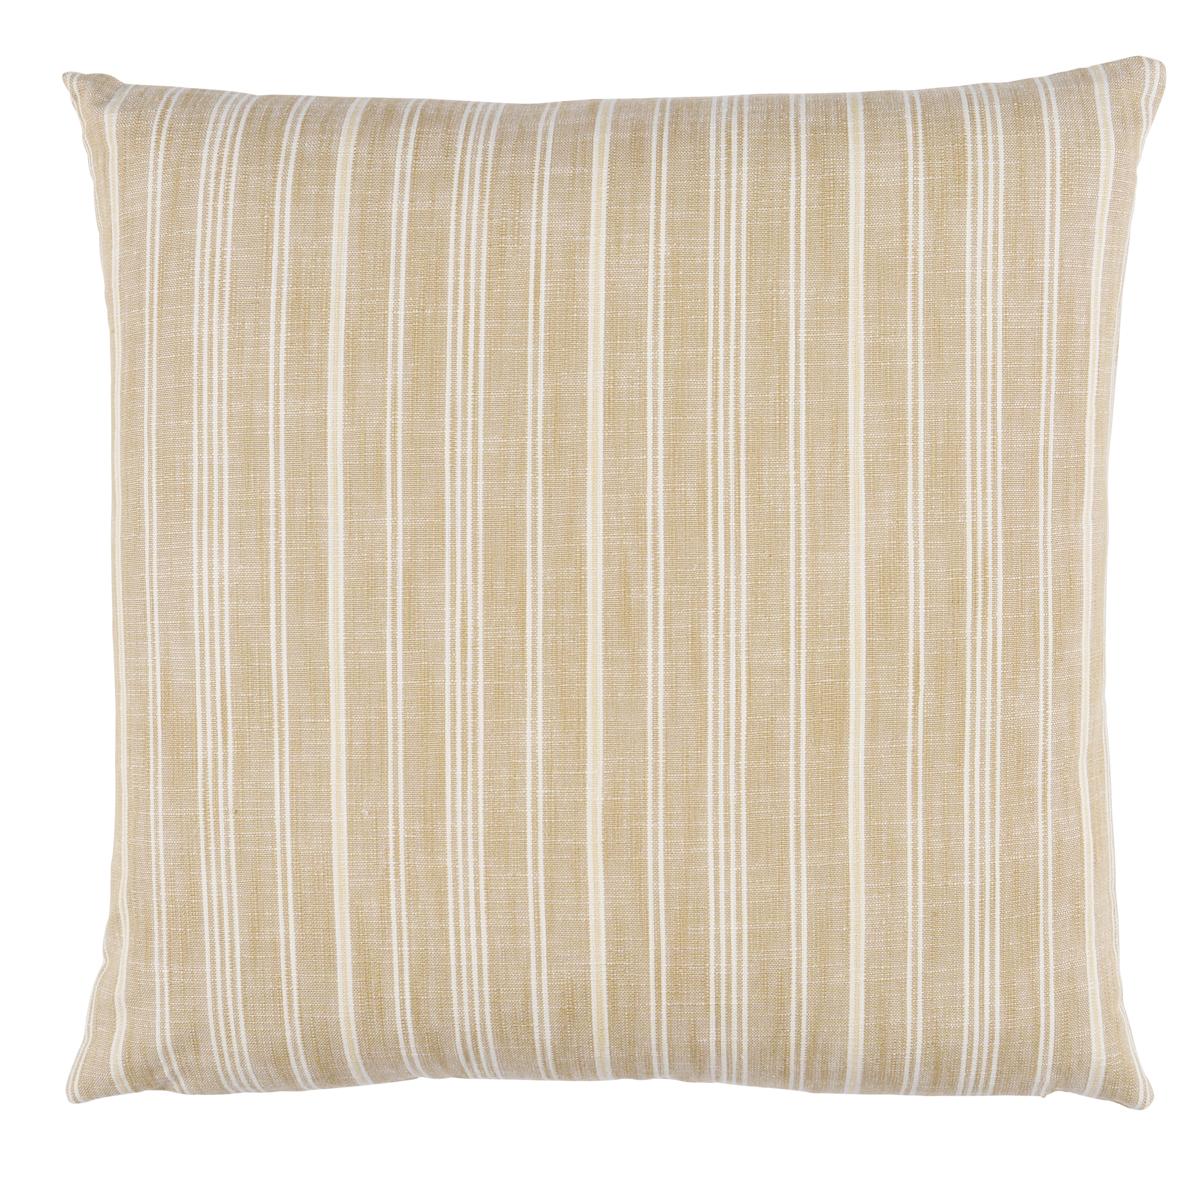 Lucy Stripe Pillow in Neutral 22 x 22"